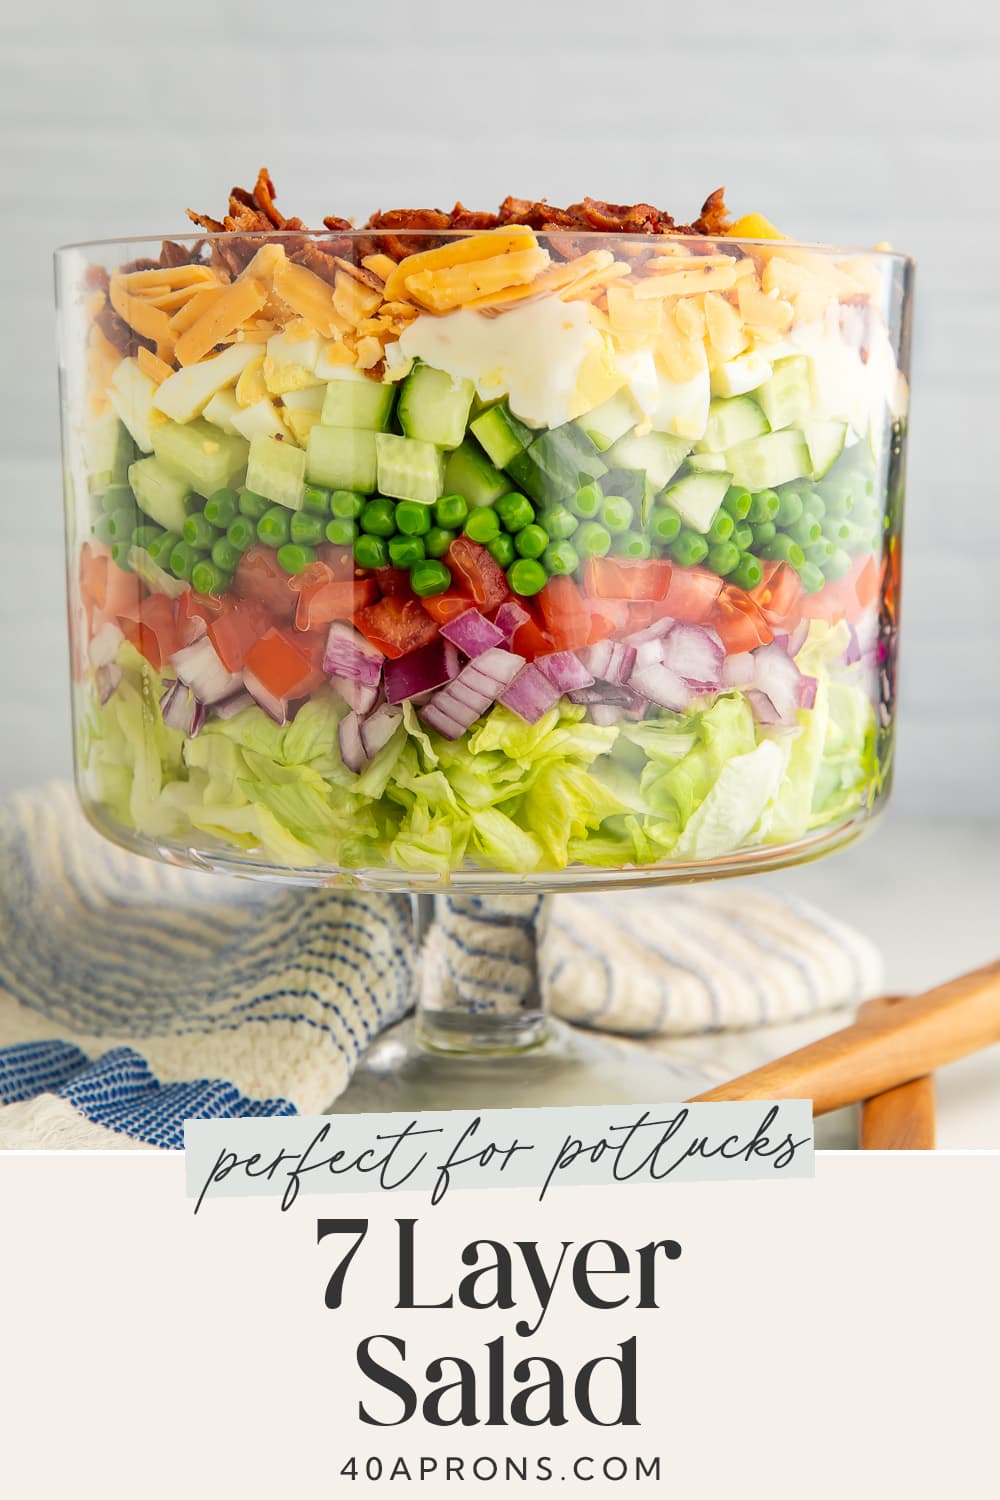 Pin graphic for 7 layer salad.